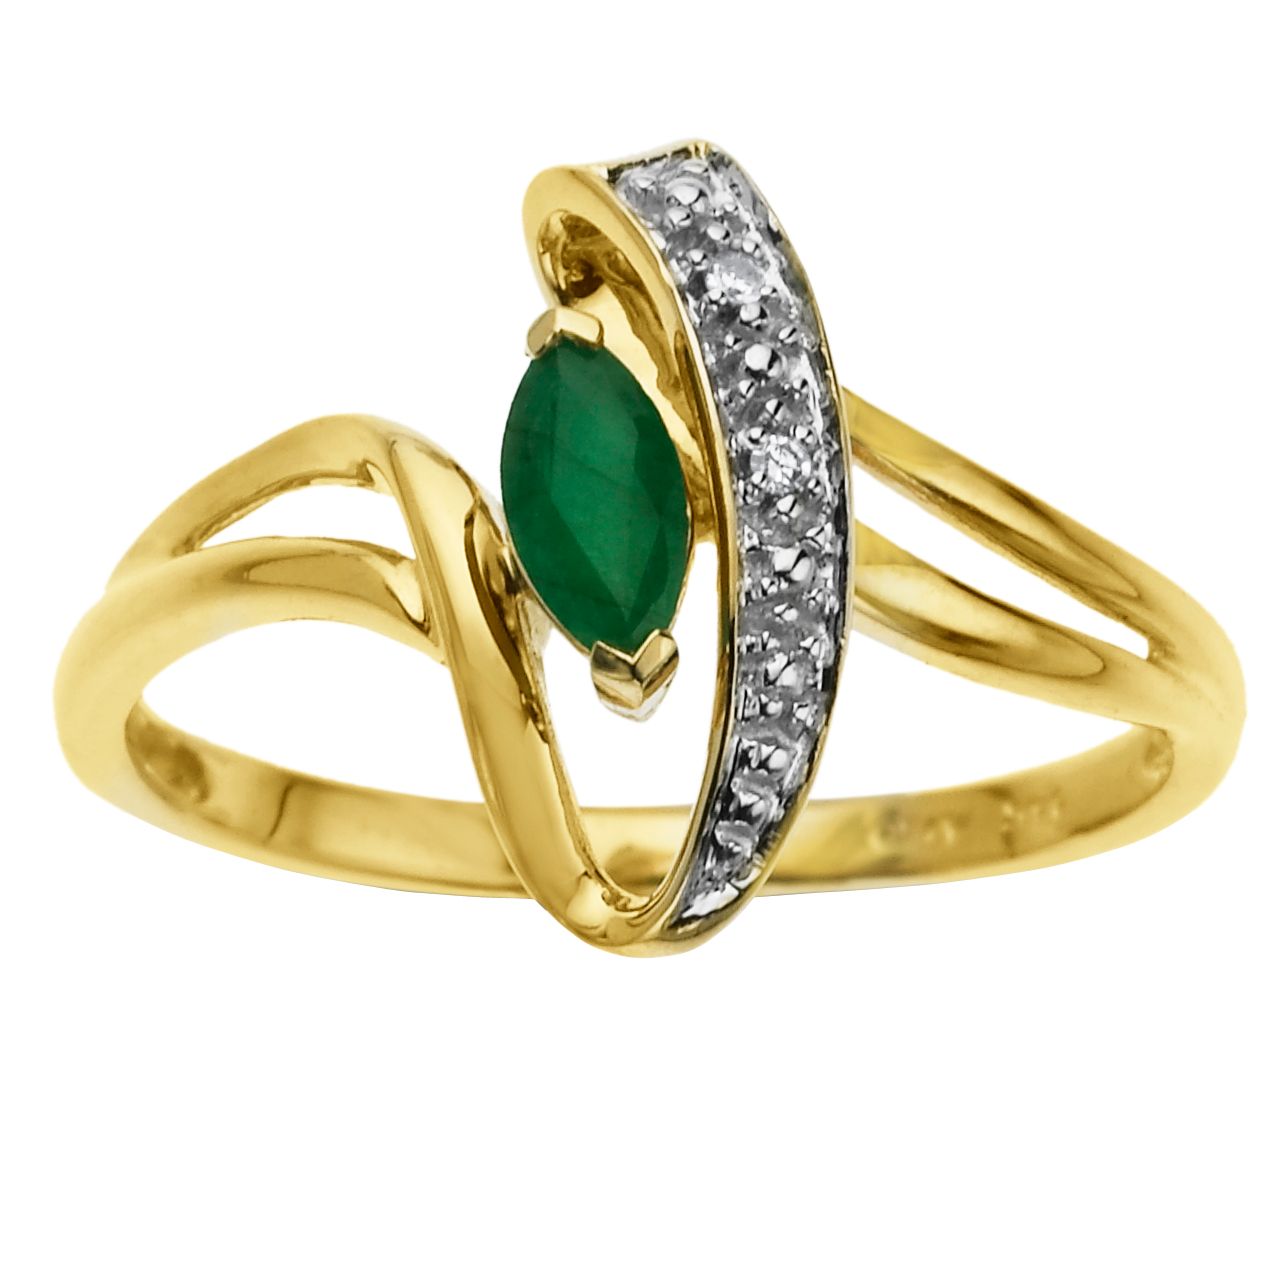 Created Emerald and Diamond Ring. 10K Yellow Gold